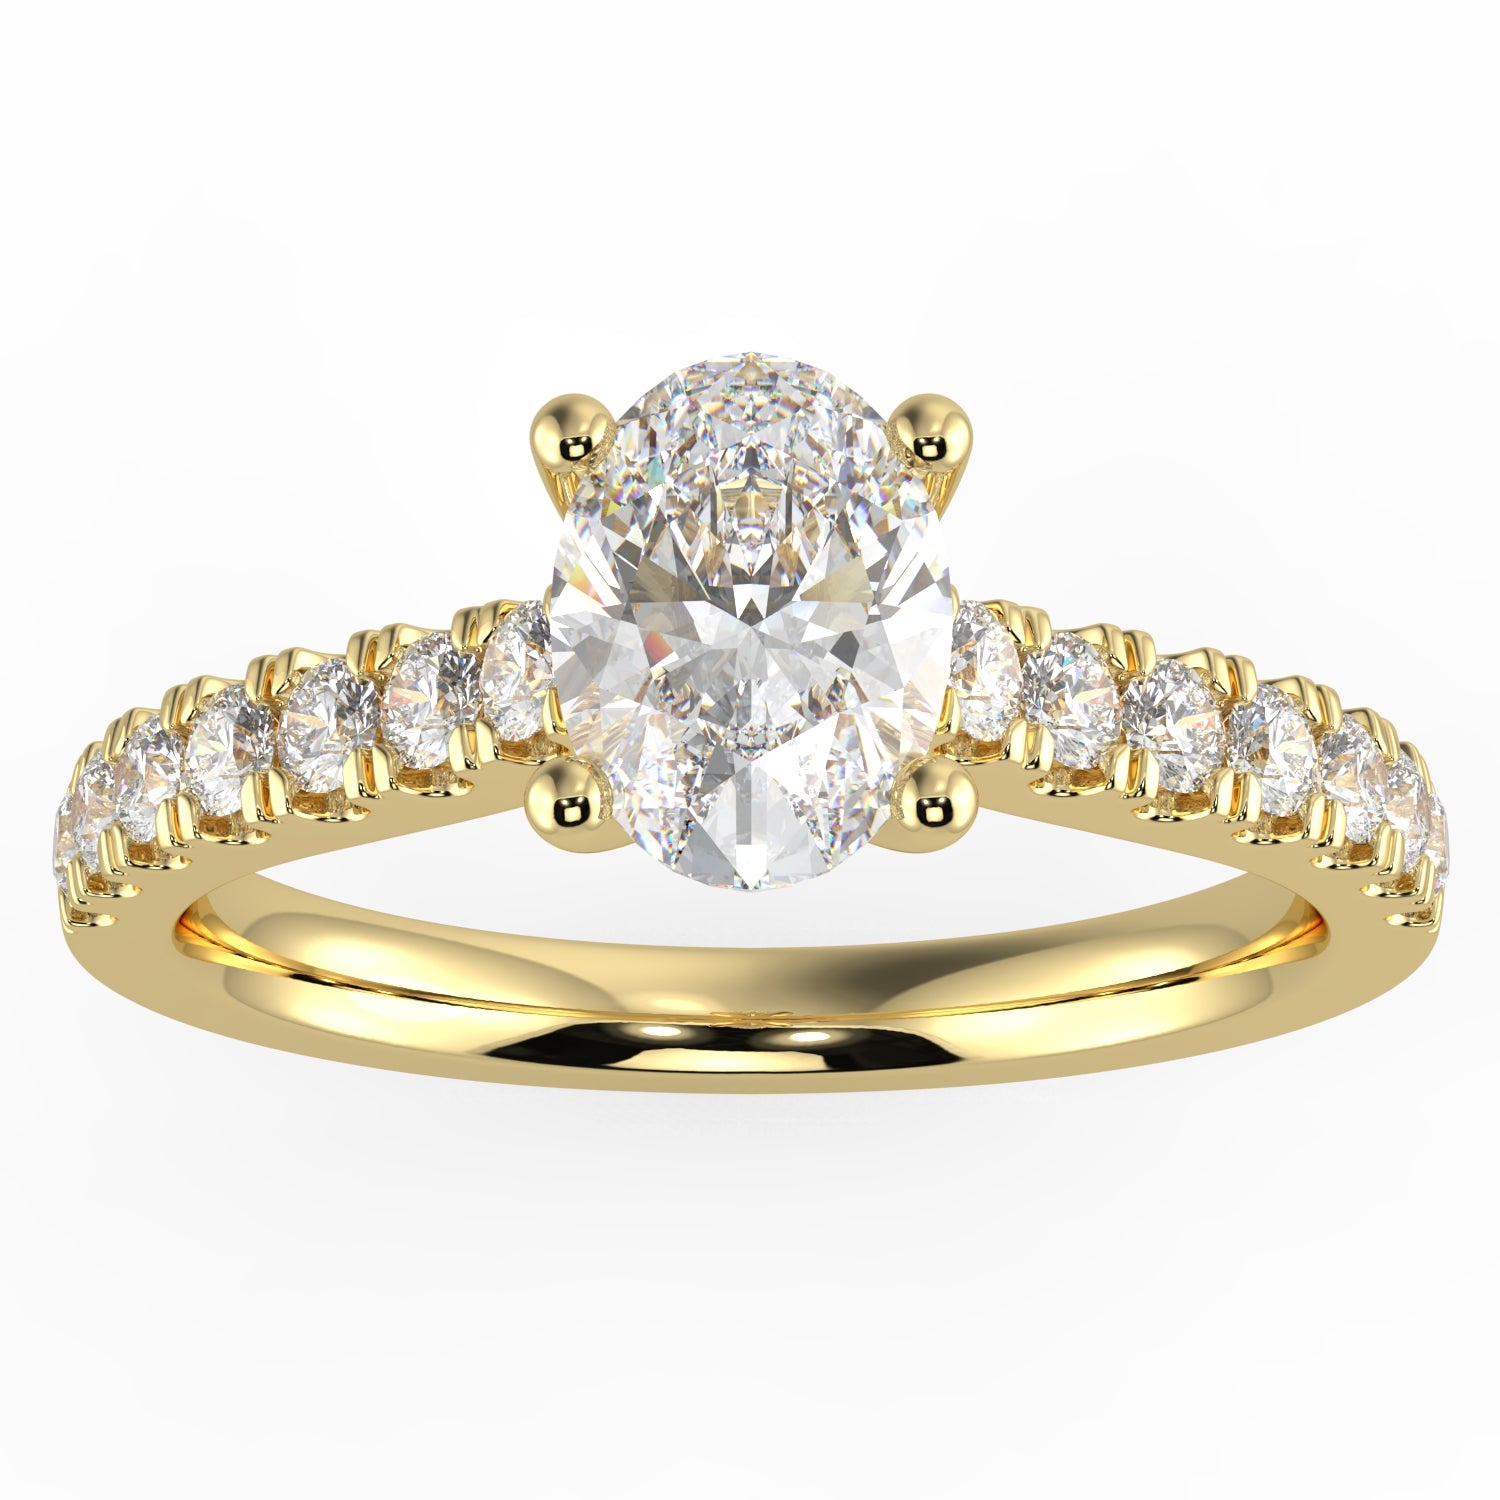 Natural Diamond Slim Shank Ring with 0.70ctw Oval Shape Center & 0.30 Round Side GHI1 Stones Set on 14K Gold